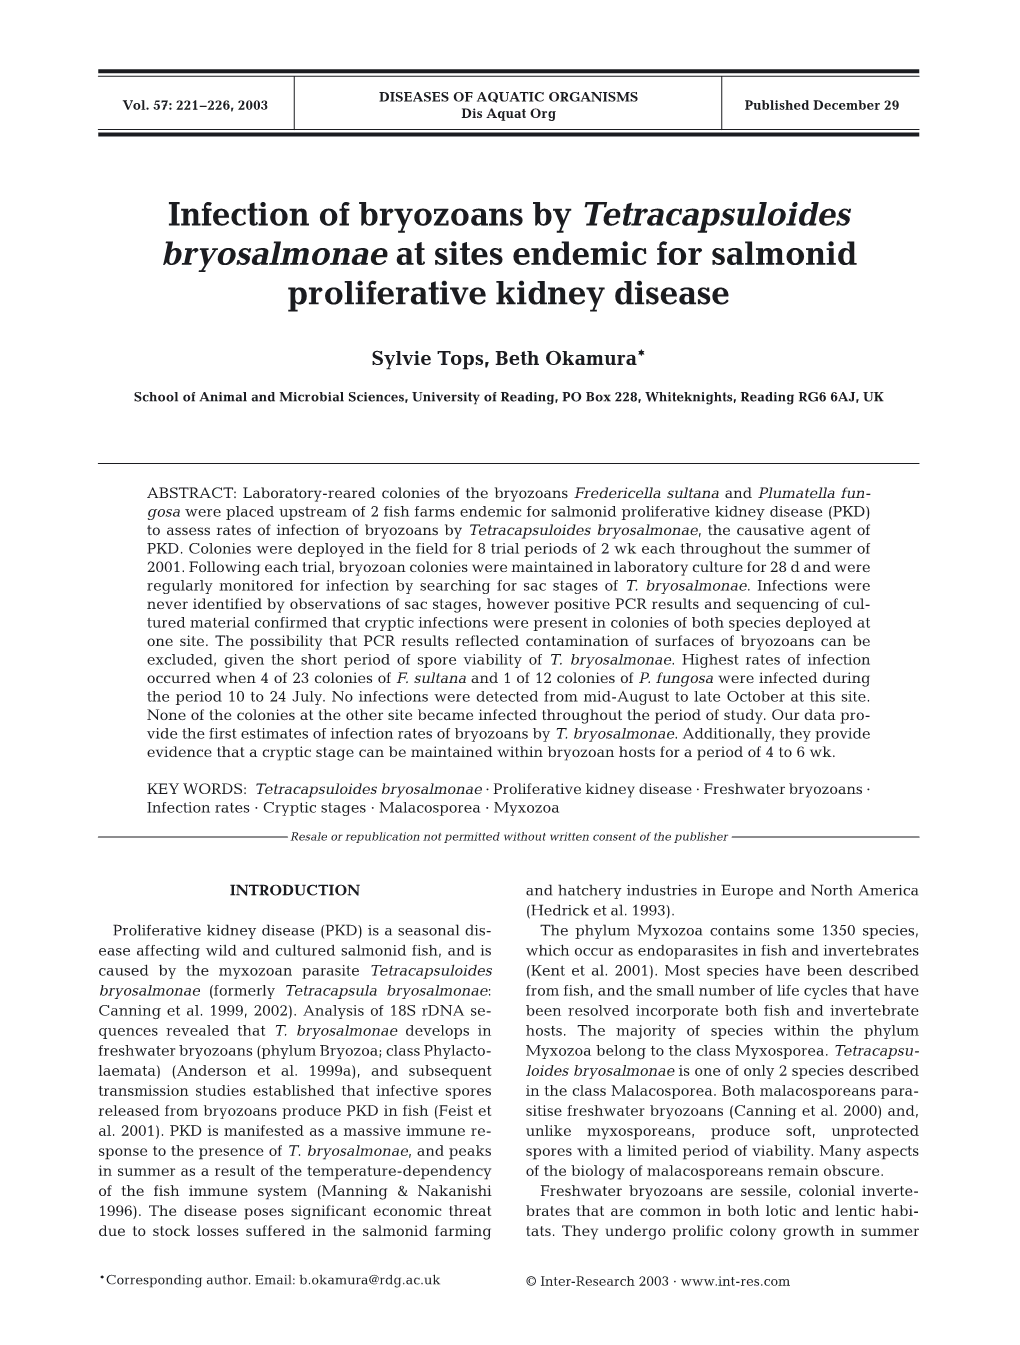 Infection of Bryozoans by Tetracapsuloides Bryosalmonae at Sites Endemic for Salmonid Proliferative Kidney Disease